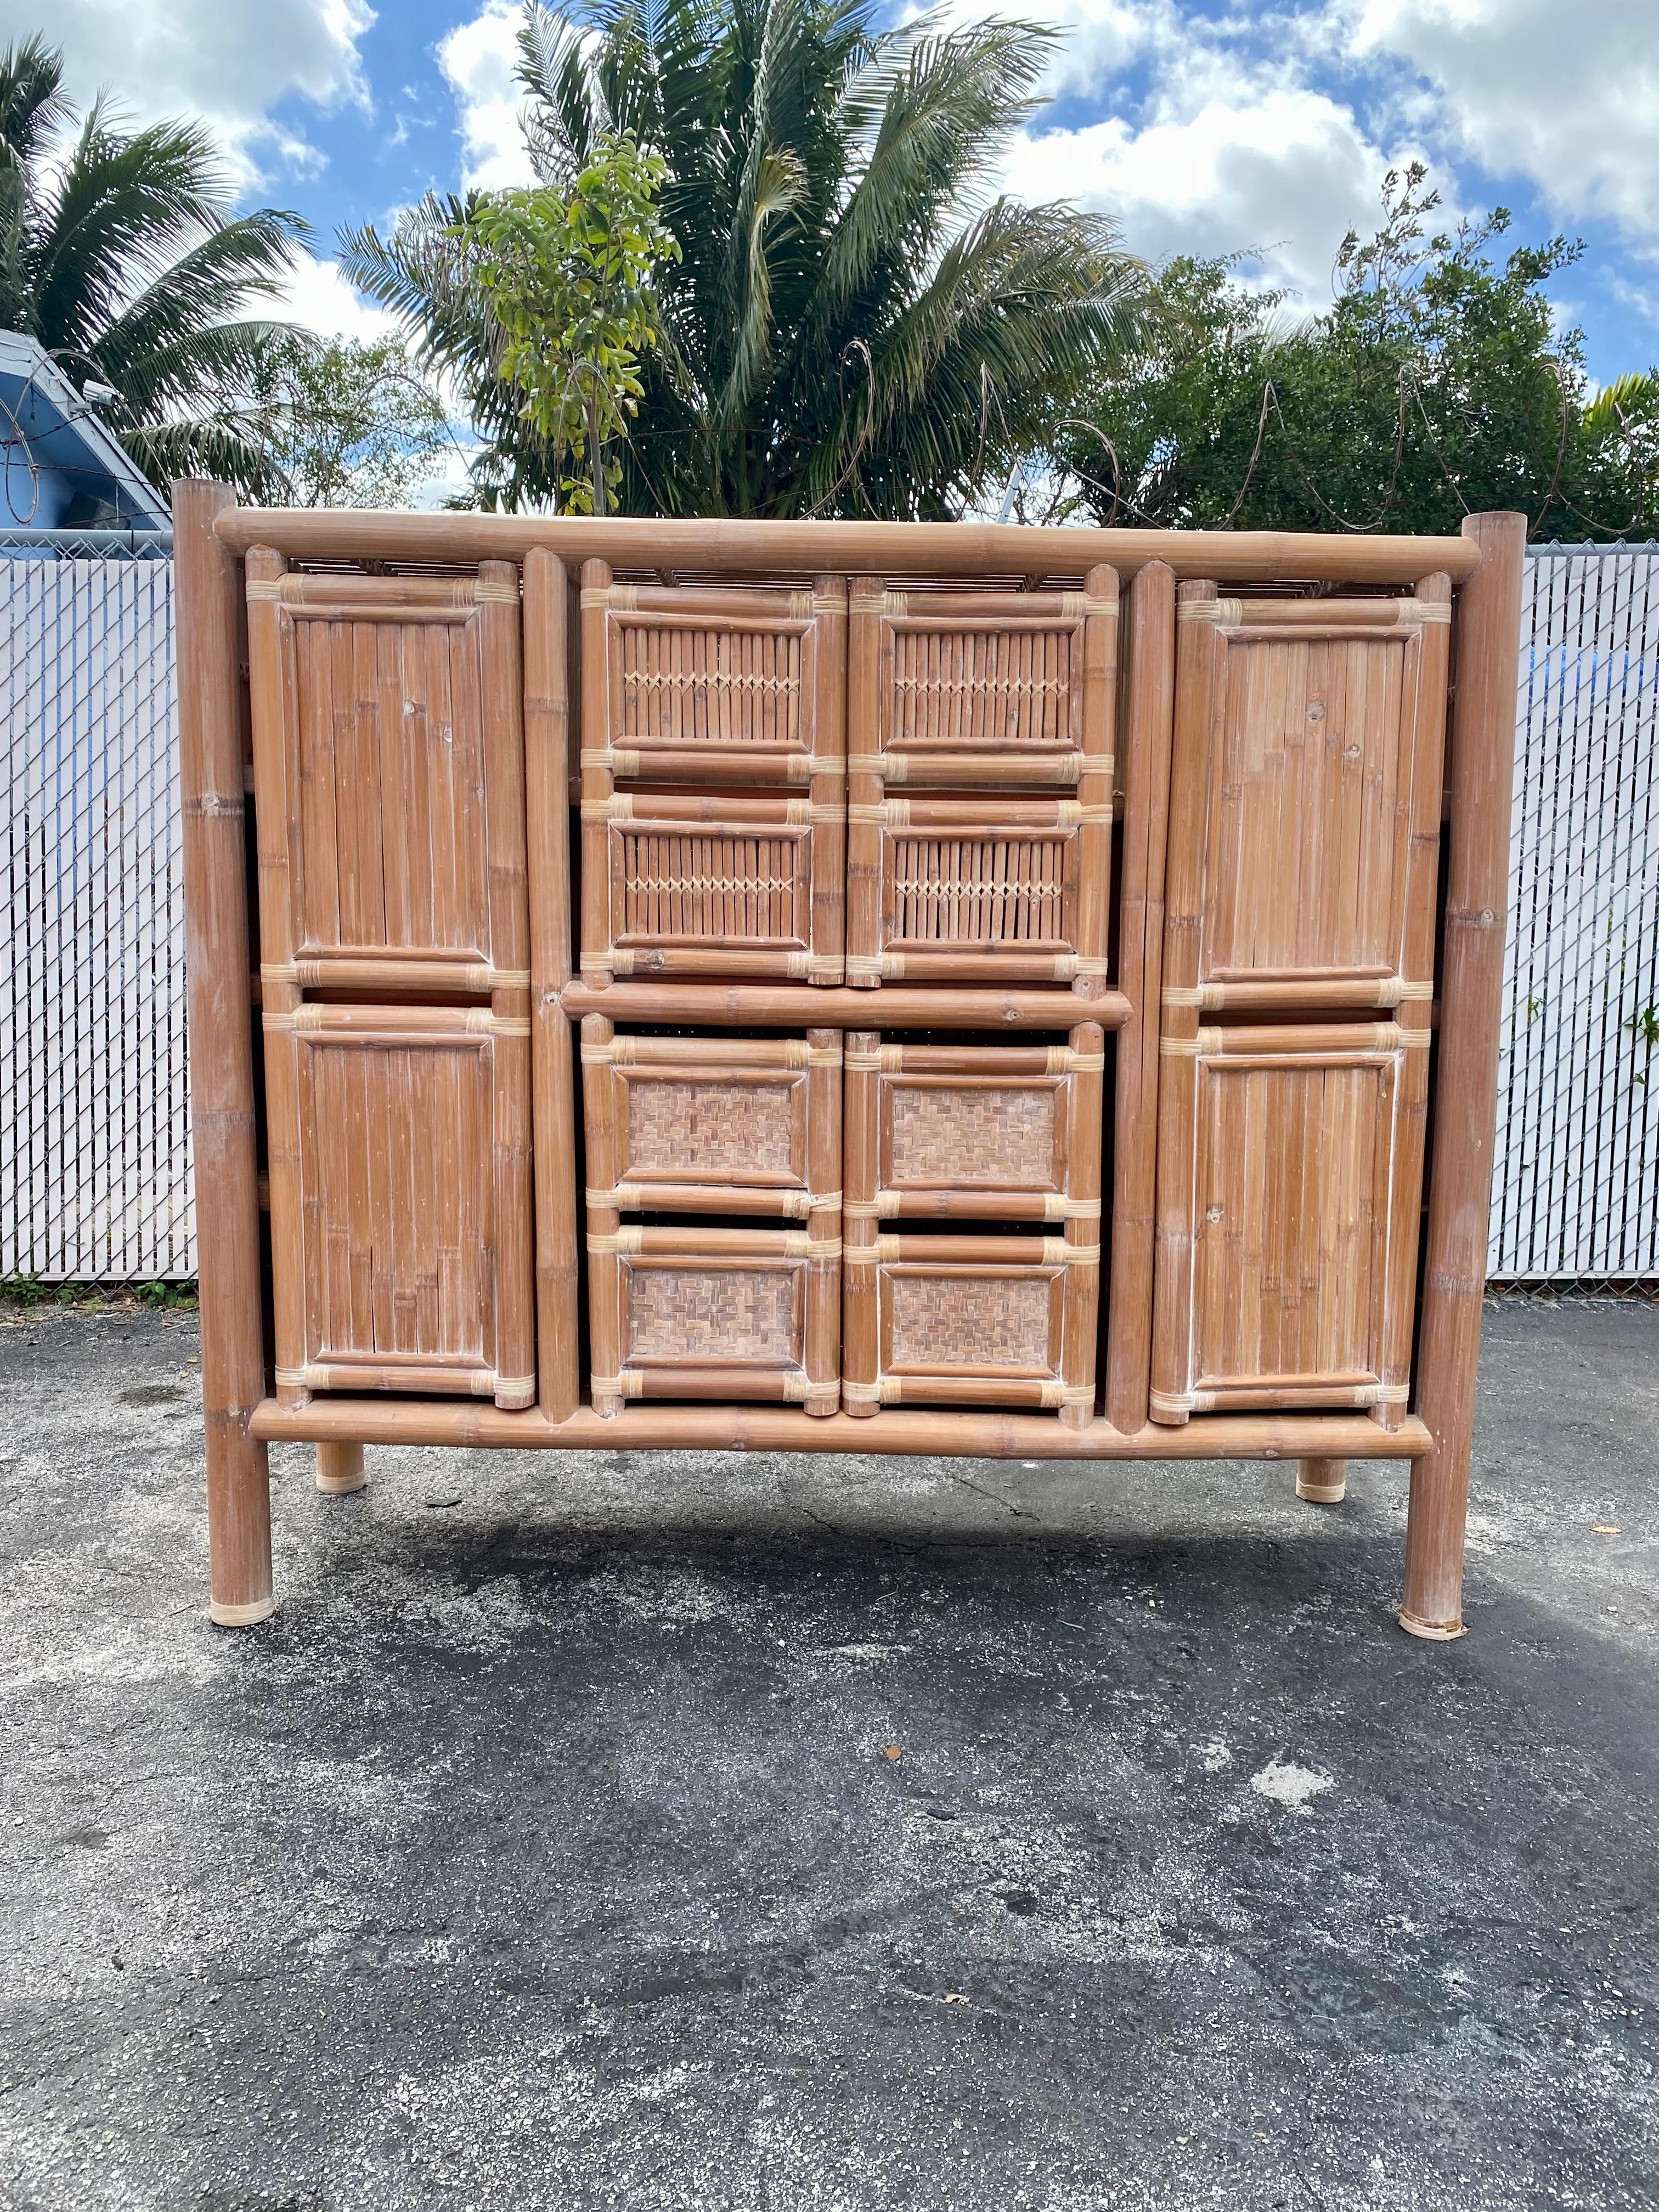 On offer on this occasion is one of the most stunning and rare rattan storage cabinet, tall sideboard you could hope to find. Outstanding design is exhibited throughout. The beautiful cabinet is statement piece and packed with personality!! Just